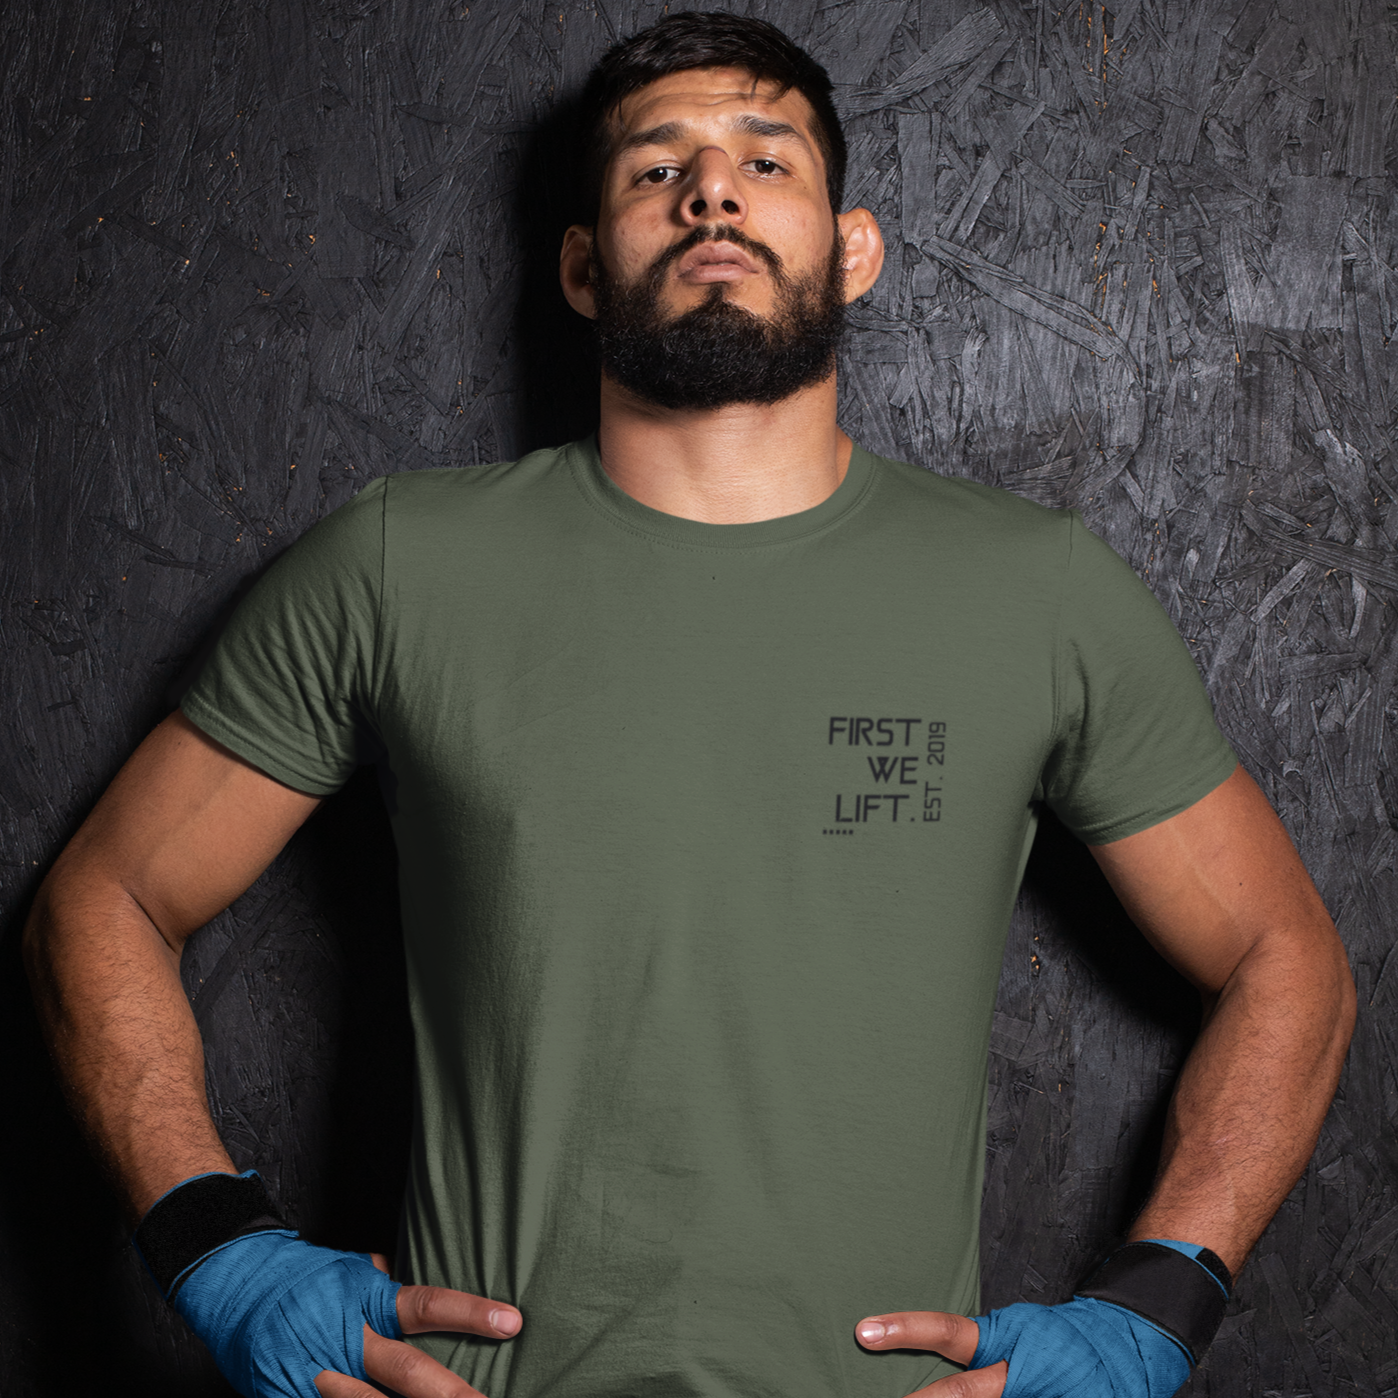 Inspire T-shirt - Olive